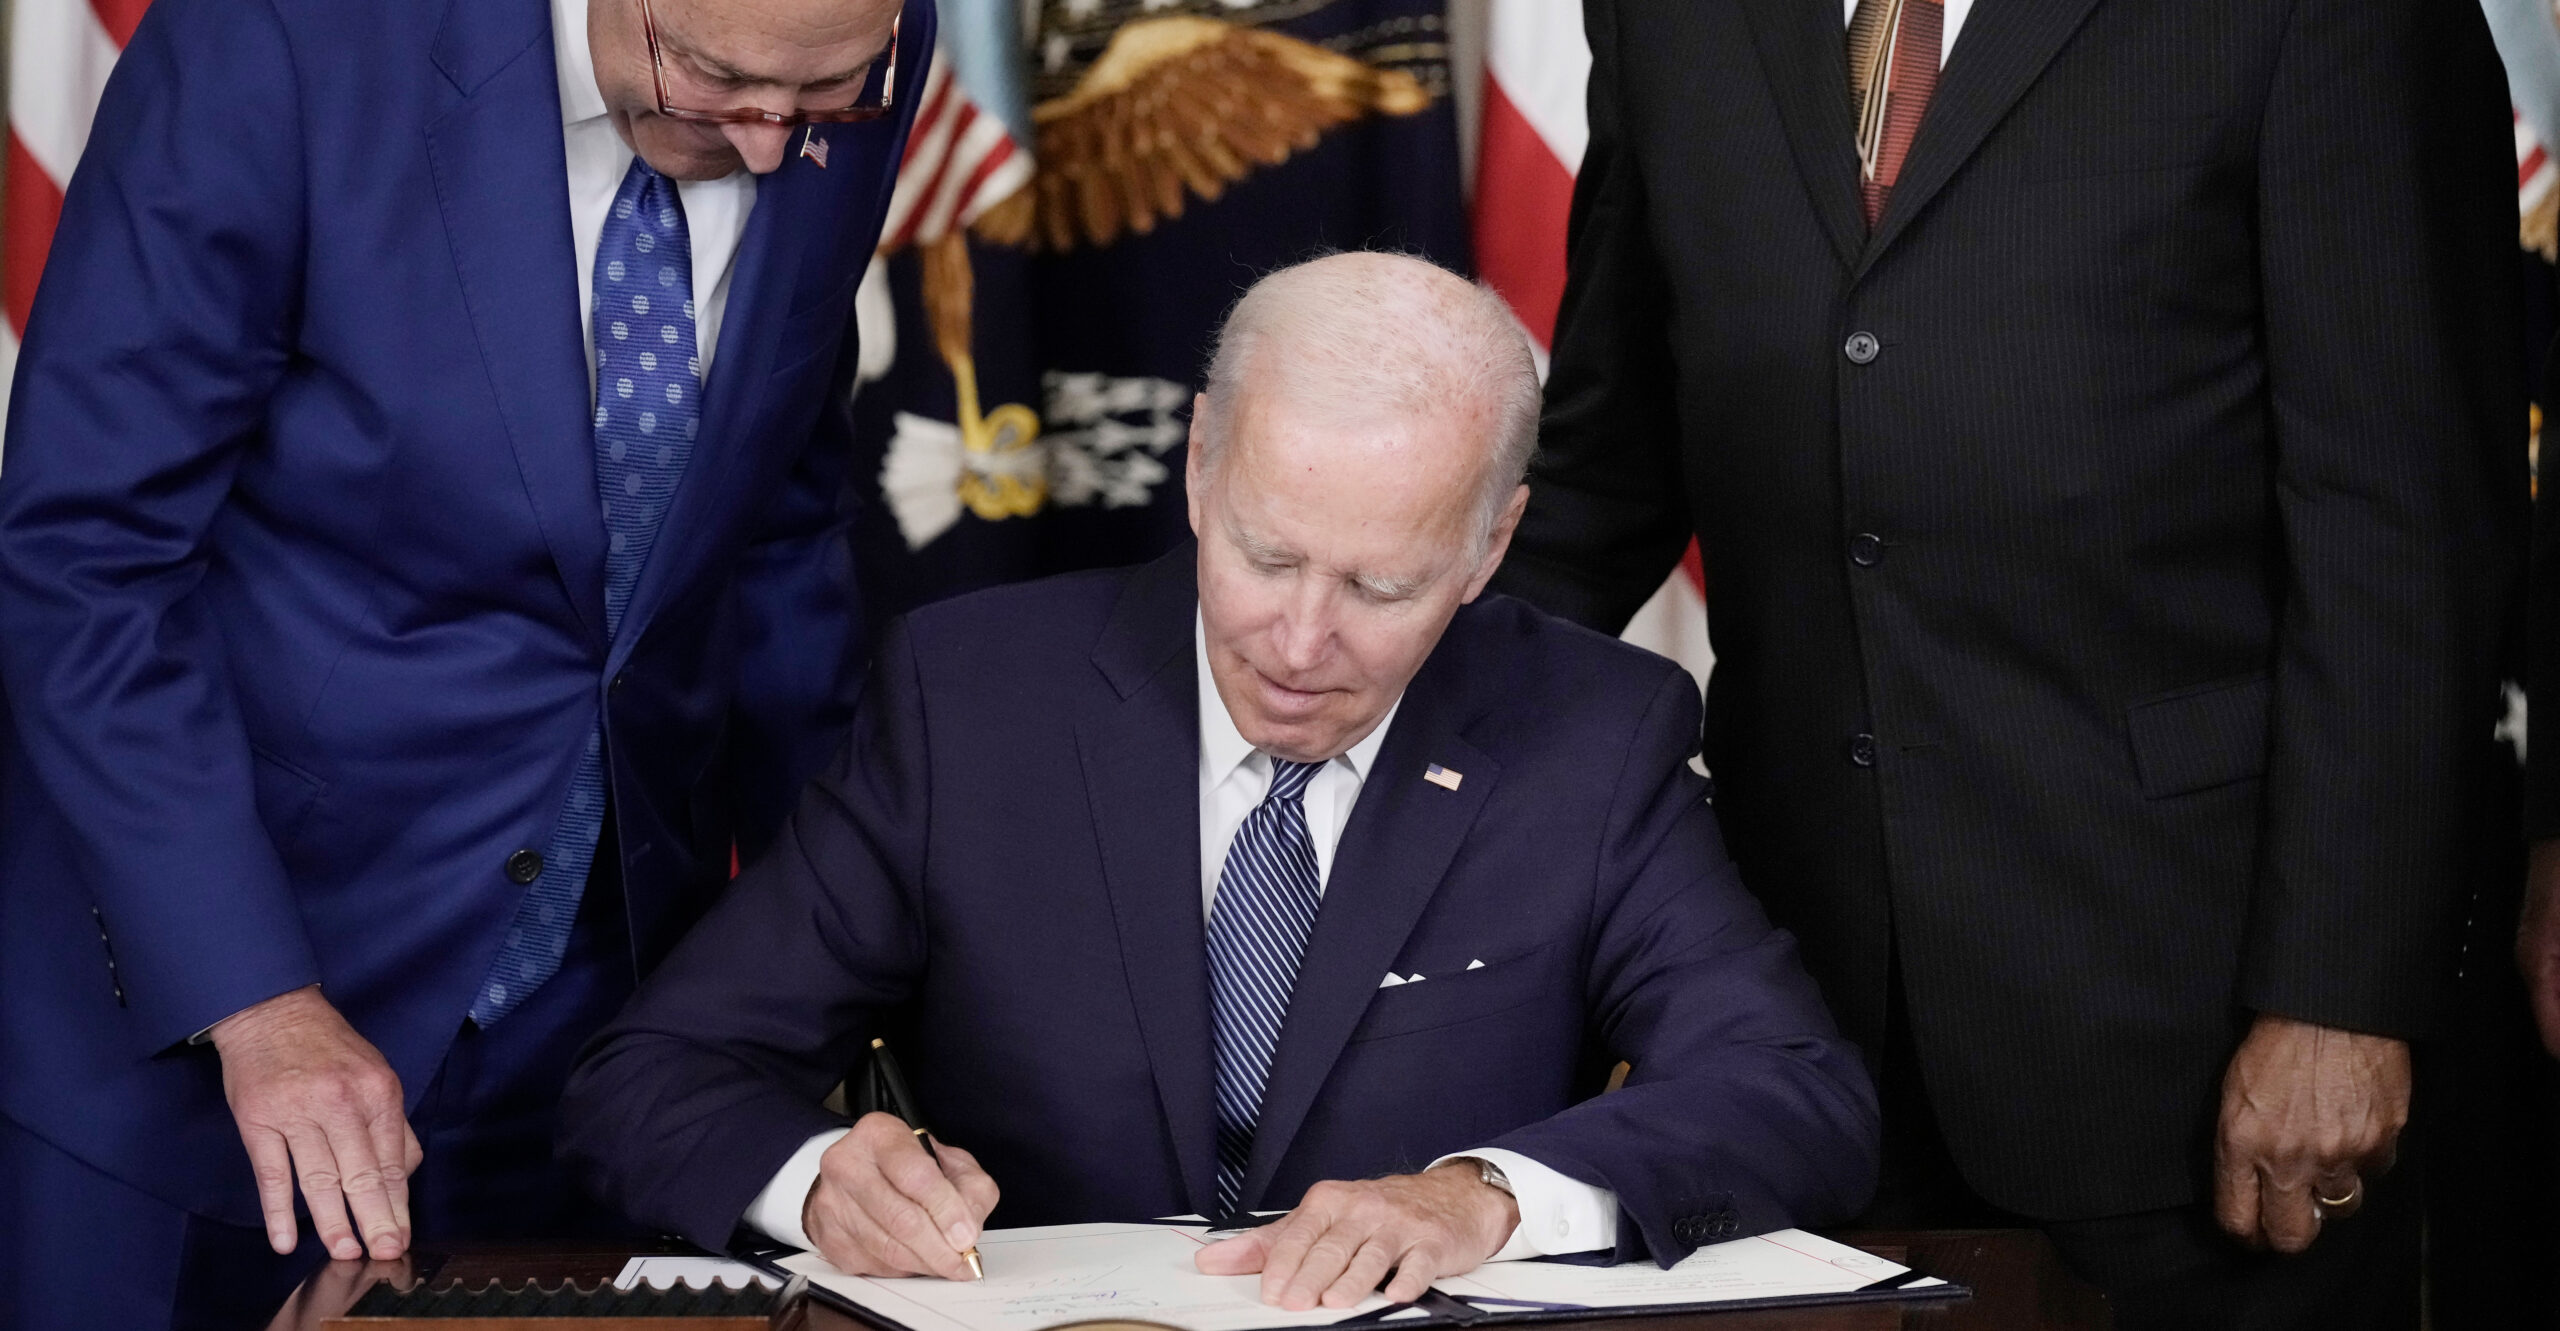 Biden Raised Taxes, but Tax Revenues Are Way Down This Year. Here Are 5 Reasons Why.